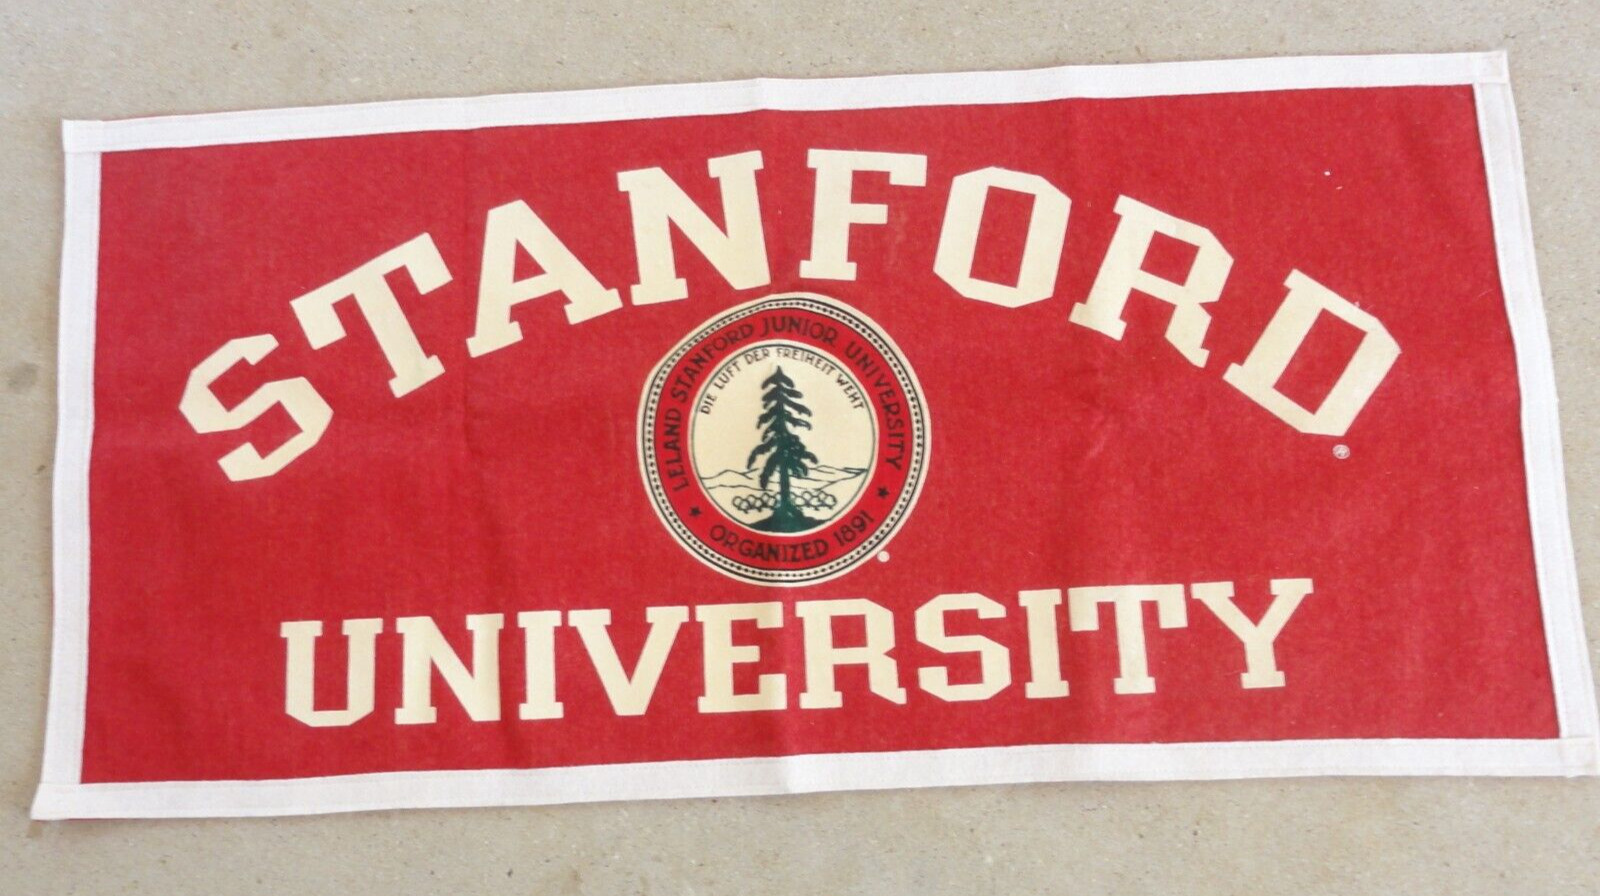 STANFORD UNIVERSITY Felt Wall Hanging Sign Pennant 36\